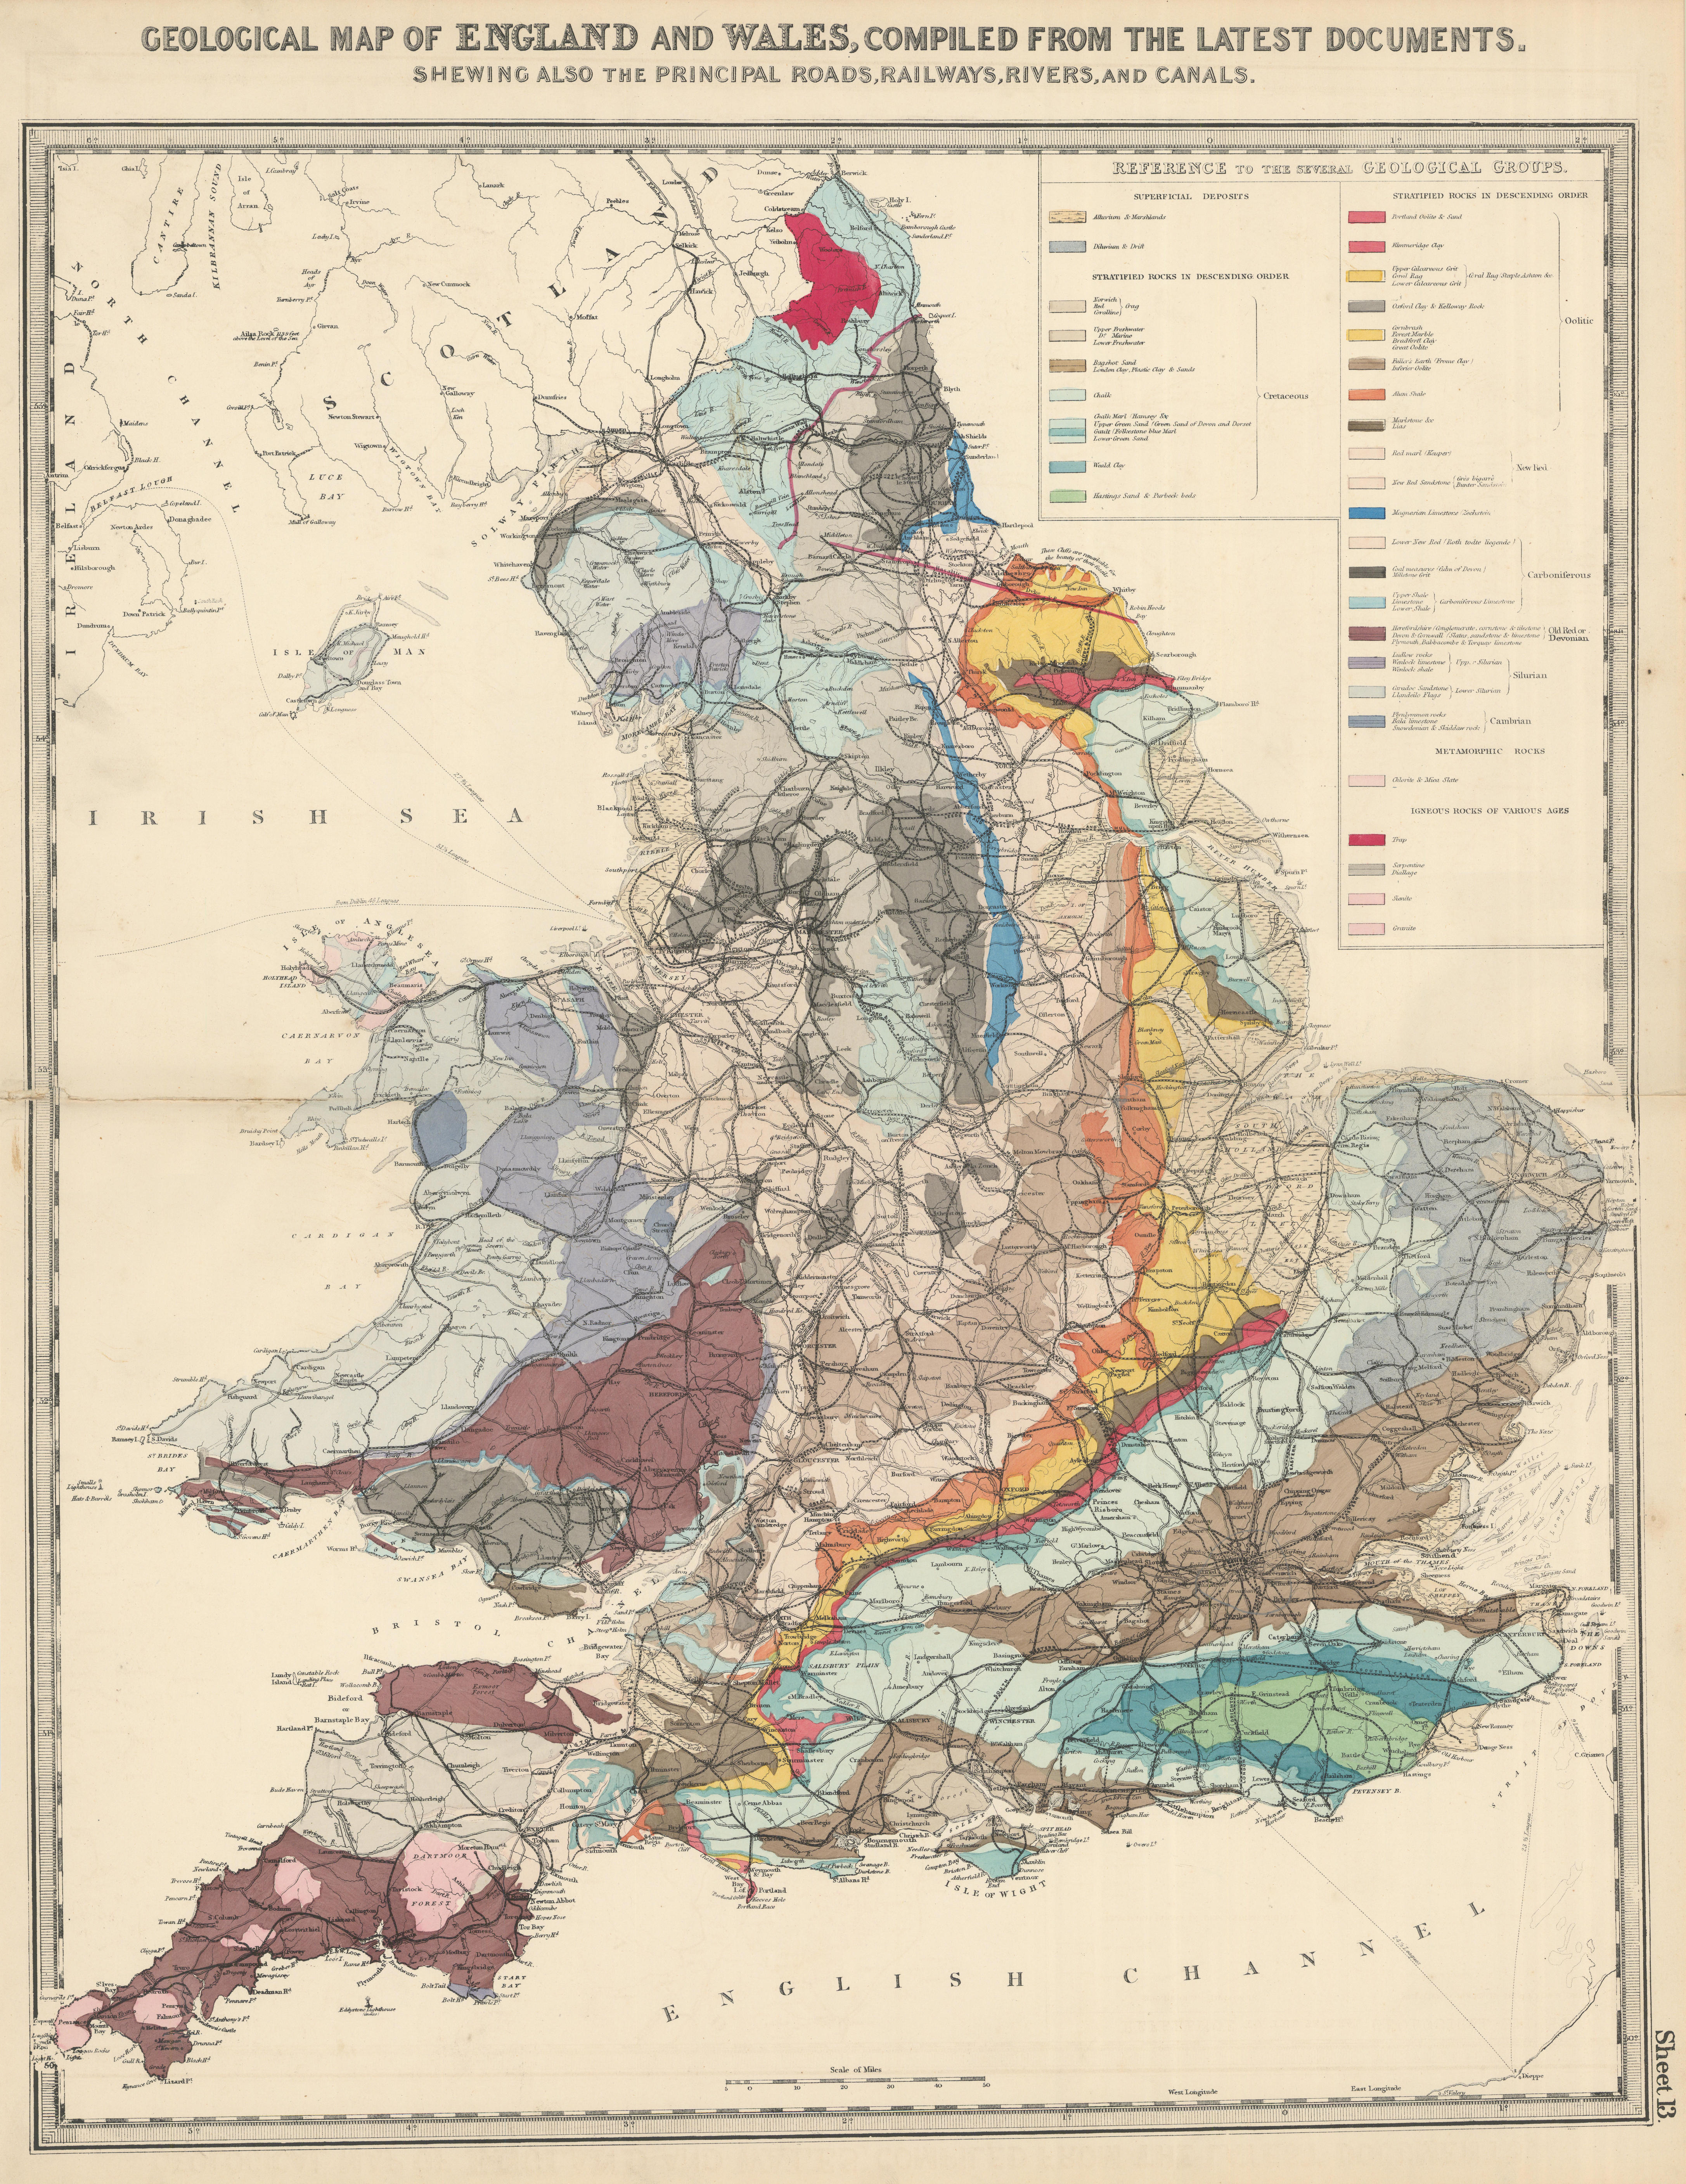 Associate Product Geological map of England and Wales, by GW Bacon 1883 old antique chart